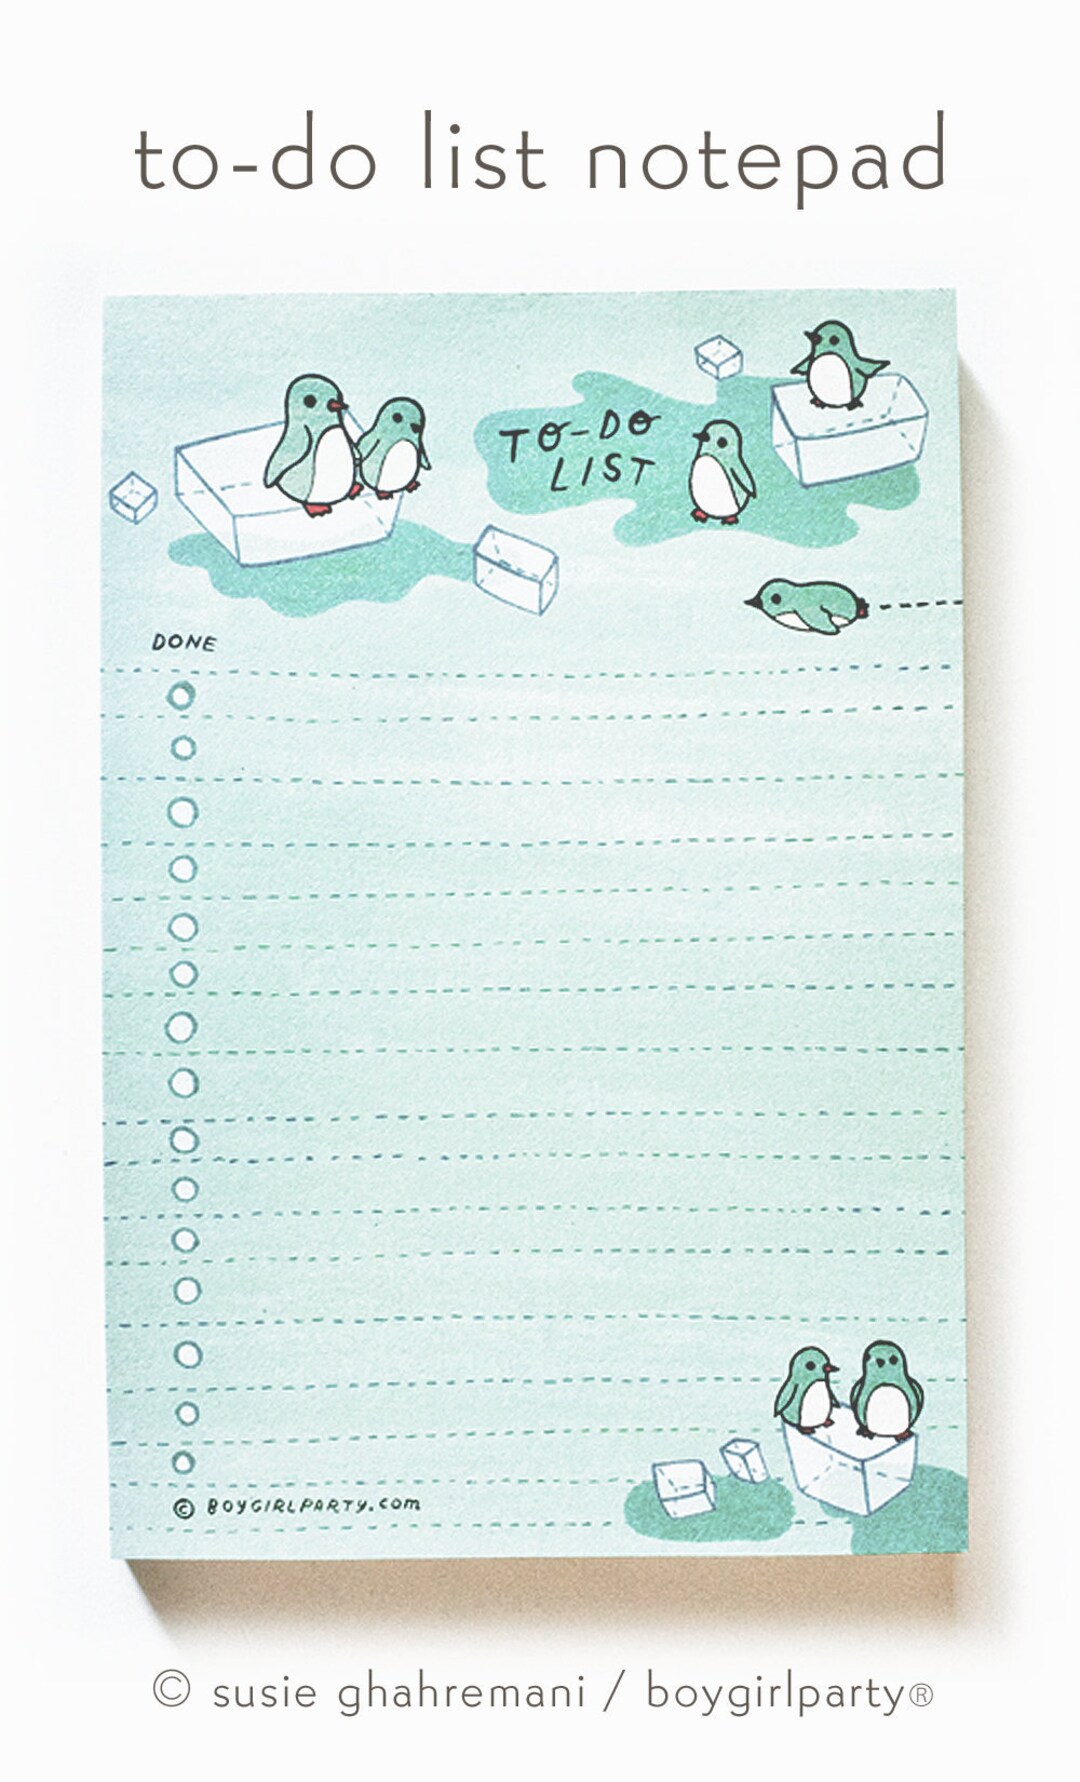 4x6 Size Sticker Albums (top loading) - Craft Penguin Planner